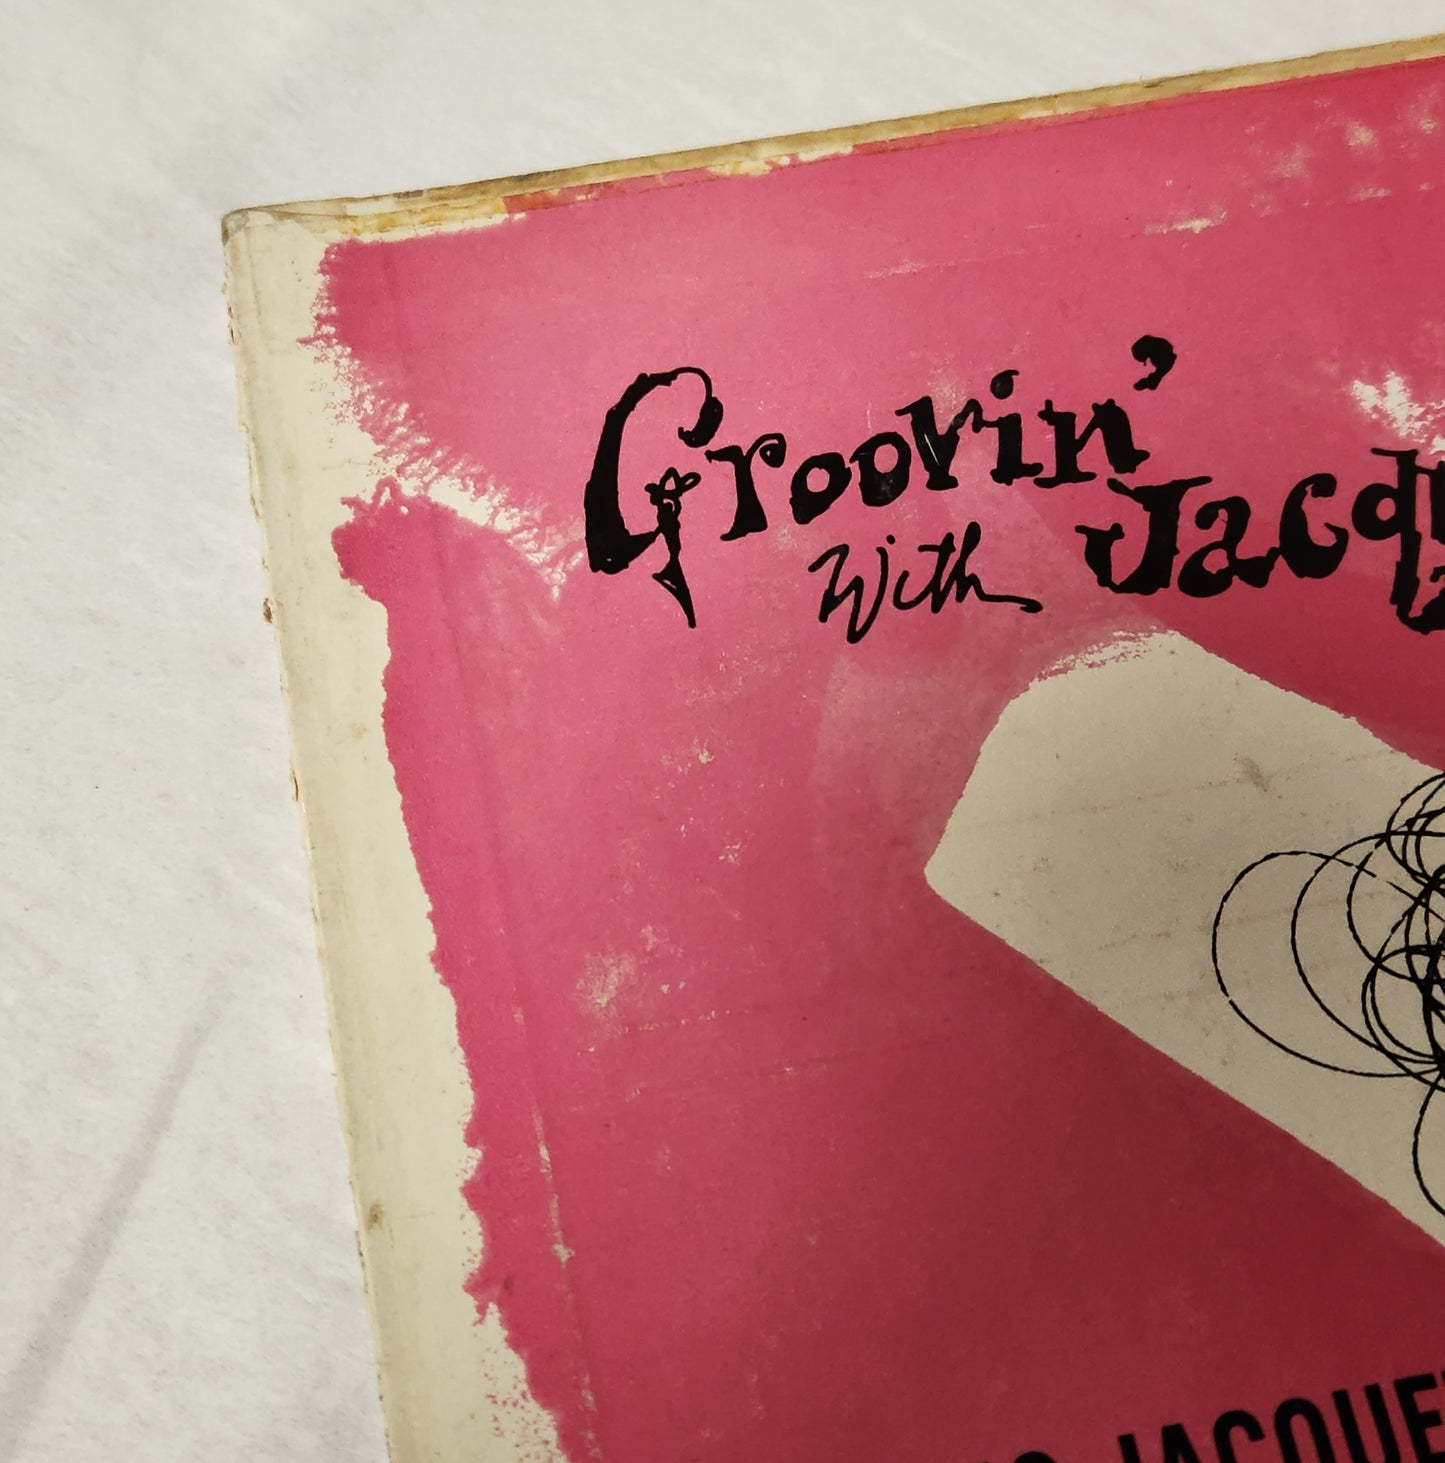 Illinois Jacquet & His Orchestra "Groovin' With Jacquet" 1953 Jazz Record Album